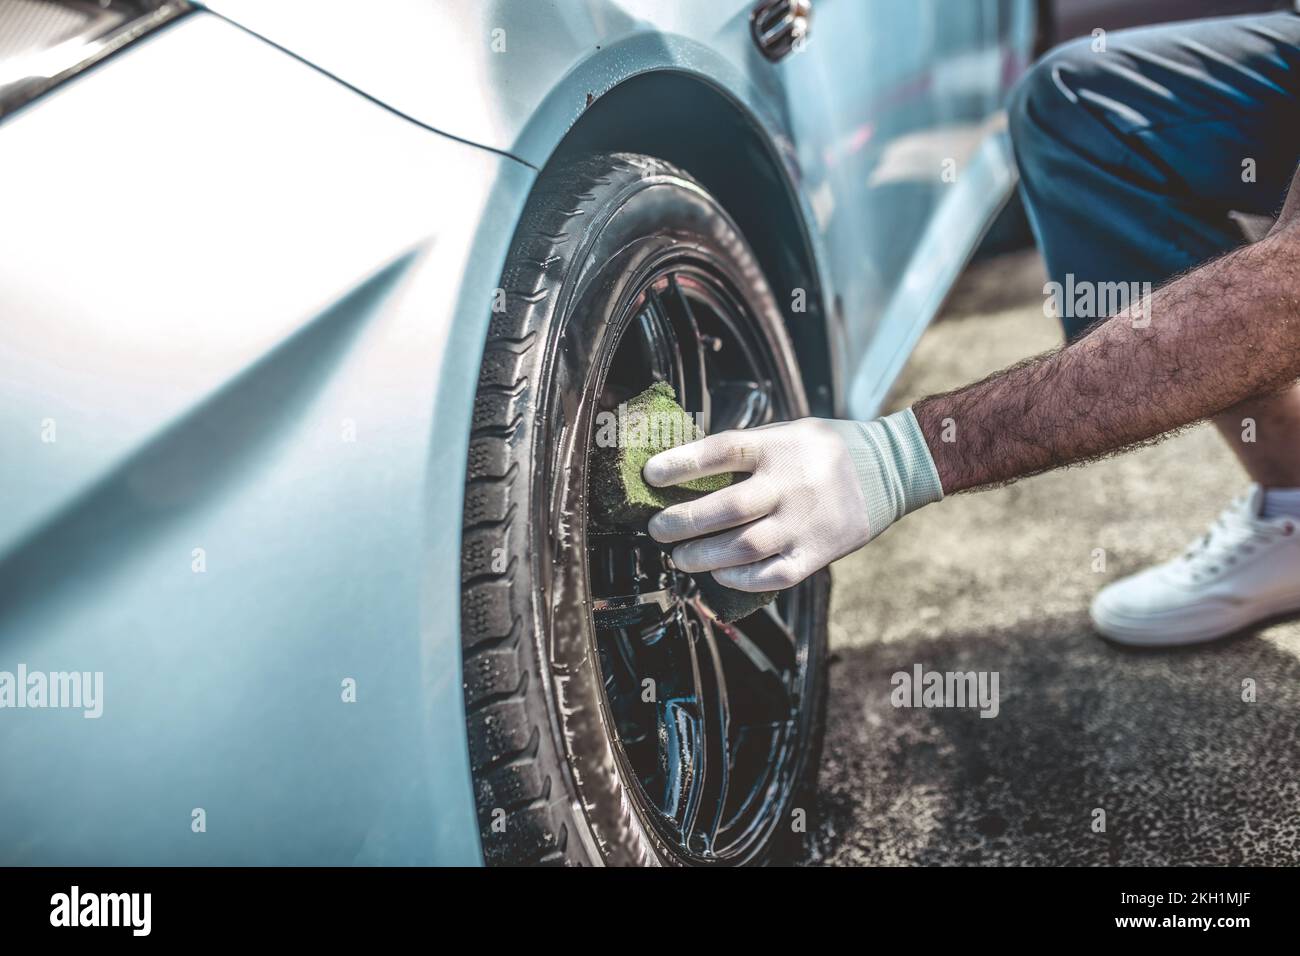 Professional service station worker cleaning an automobile wheel Stock Photo